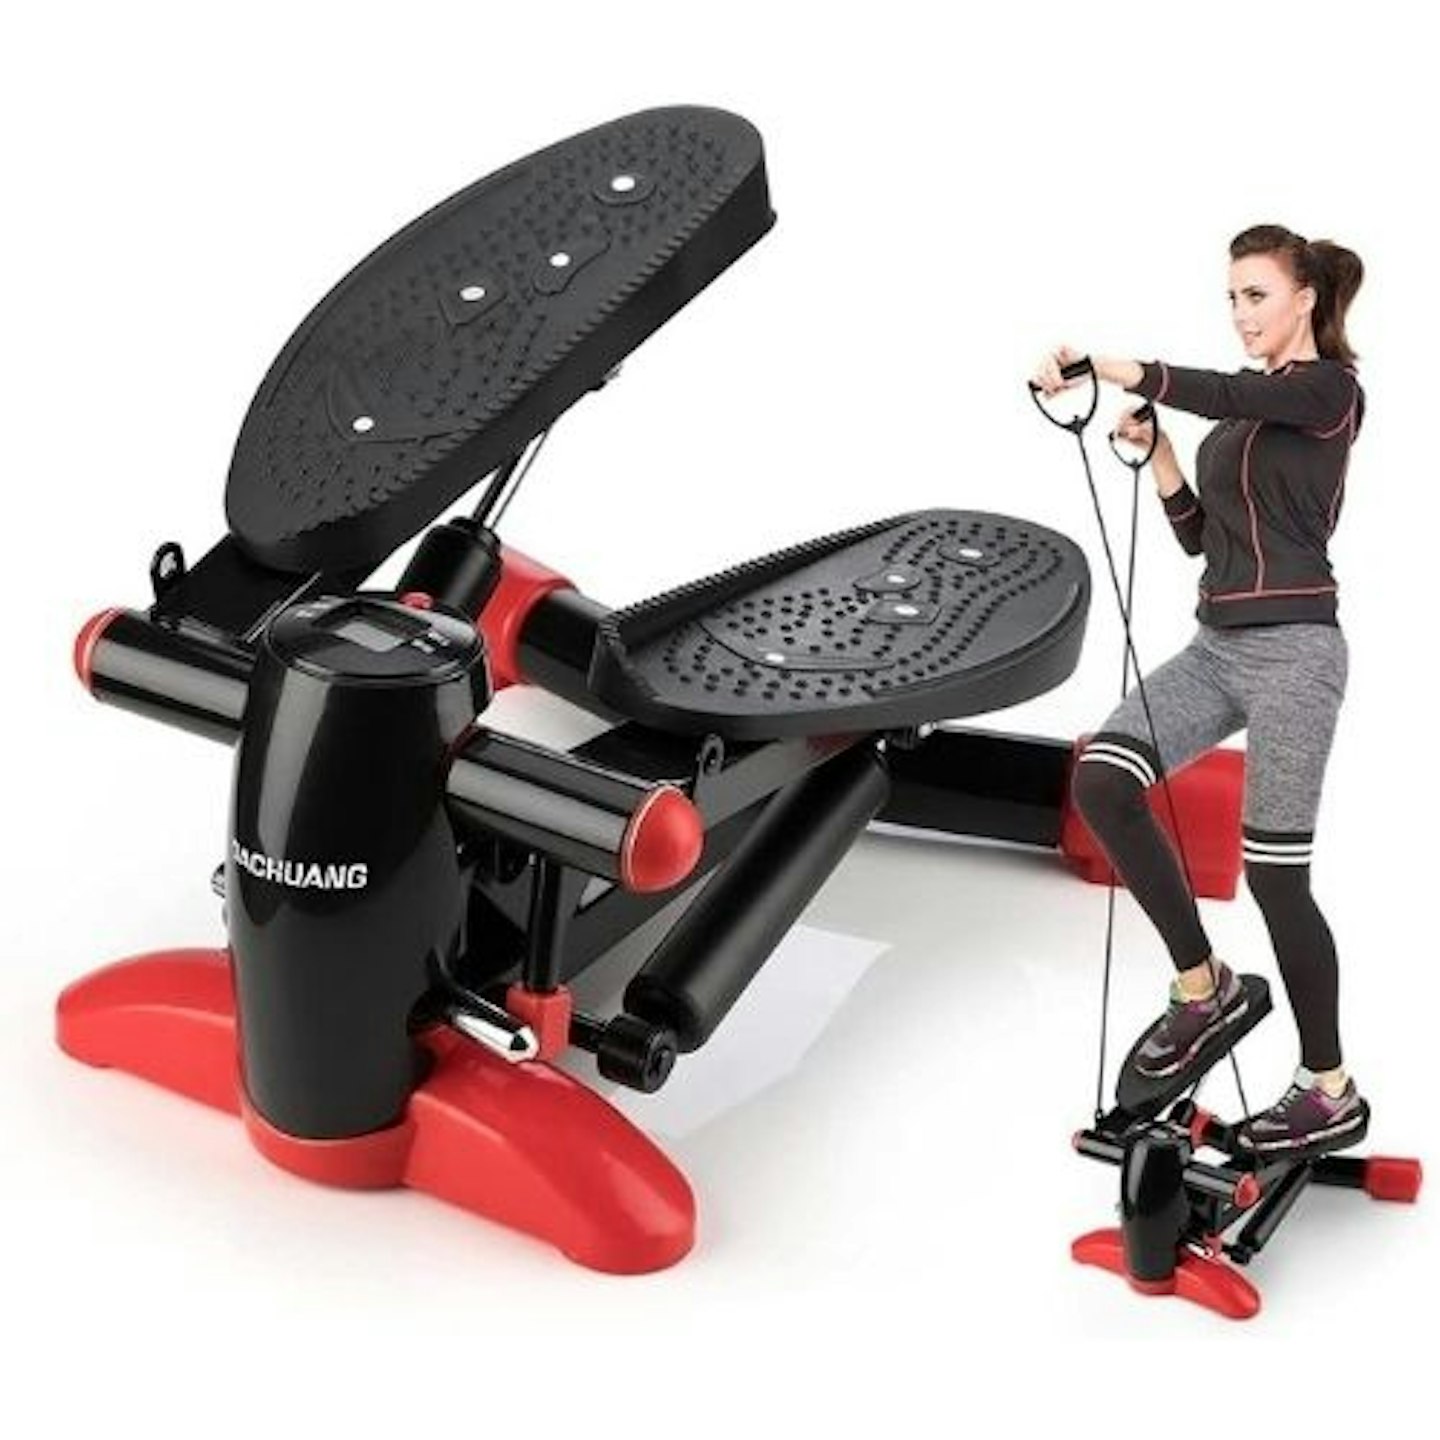 DACHUANG Exercise Stepper (including resistance bands)